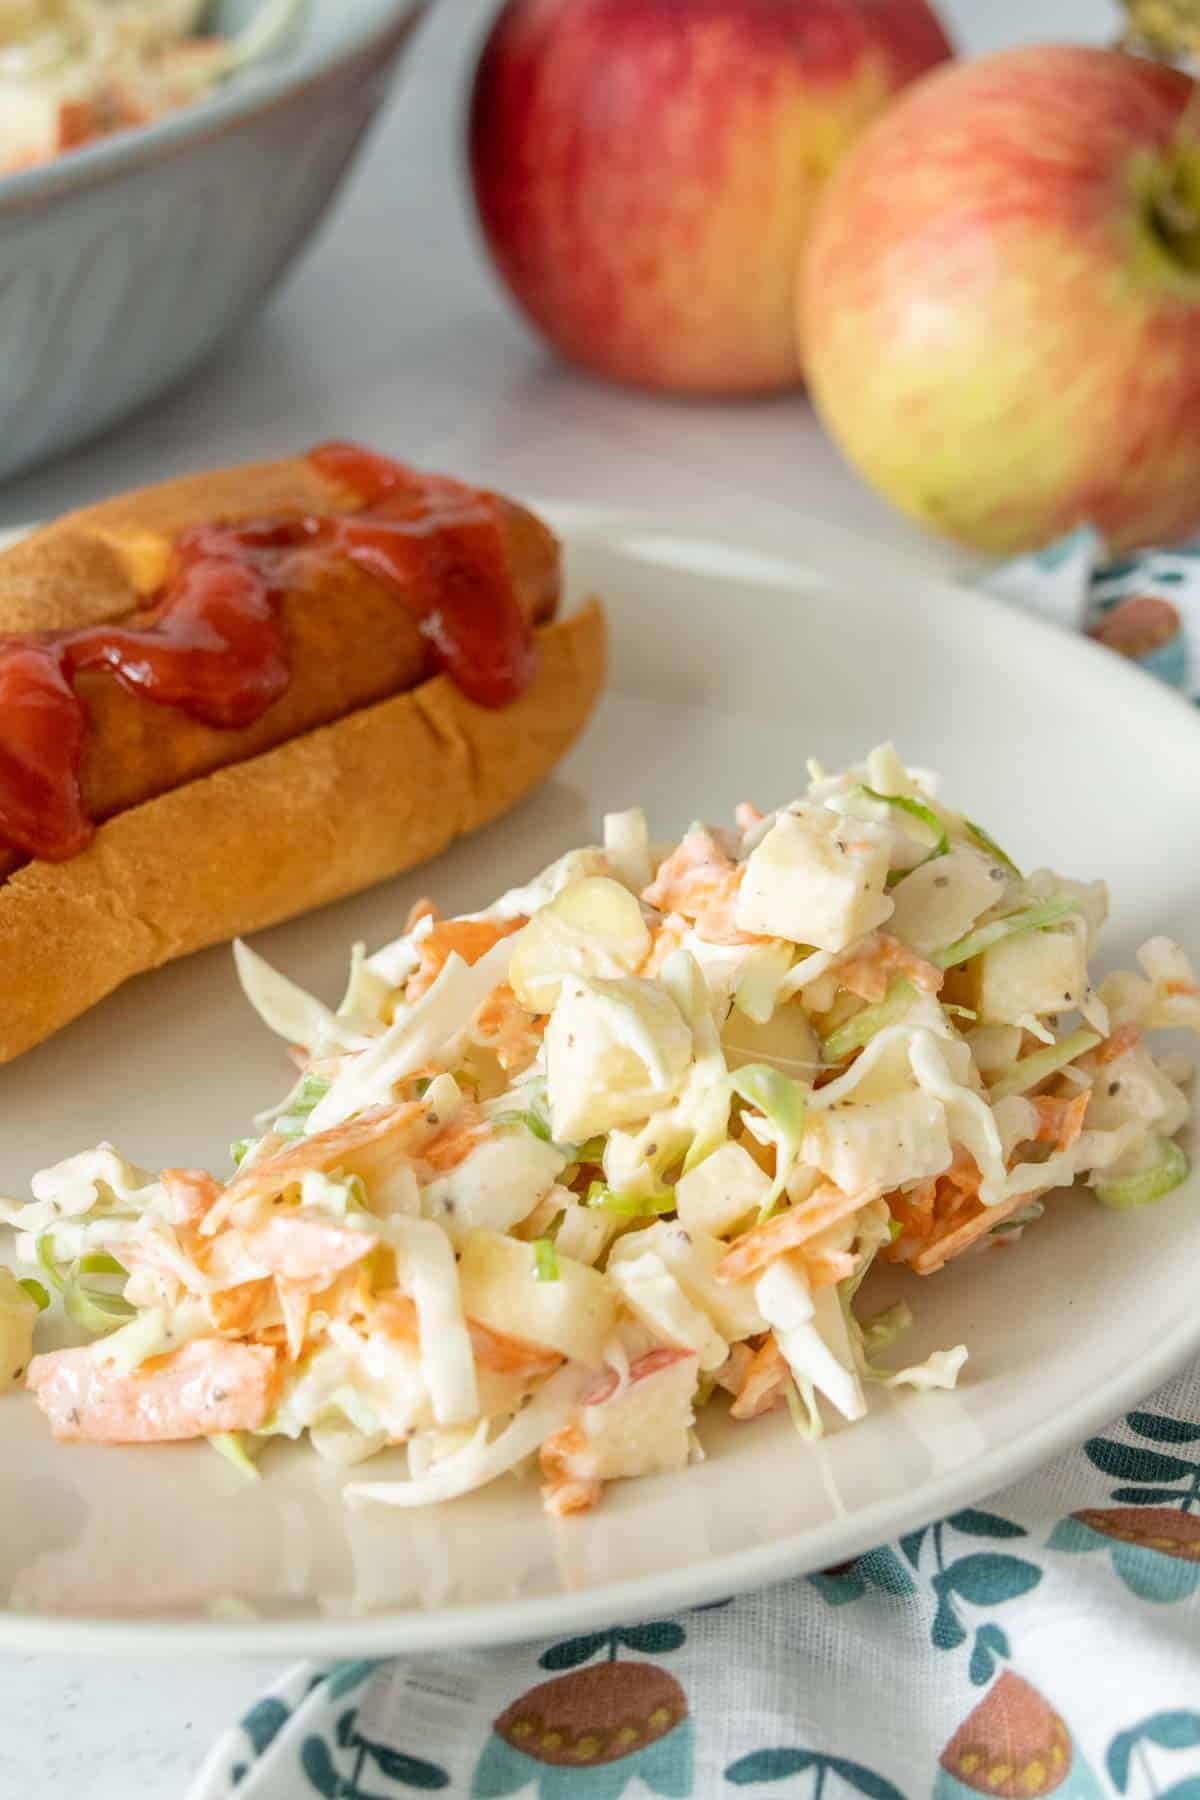 A hot dog with coleslaw and apples on a plate.